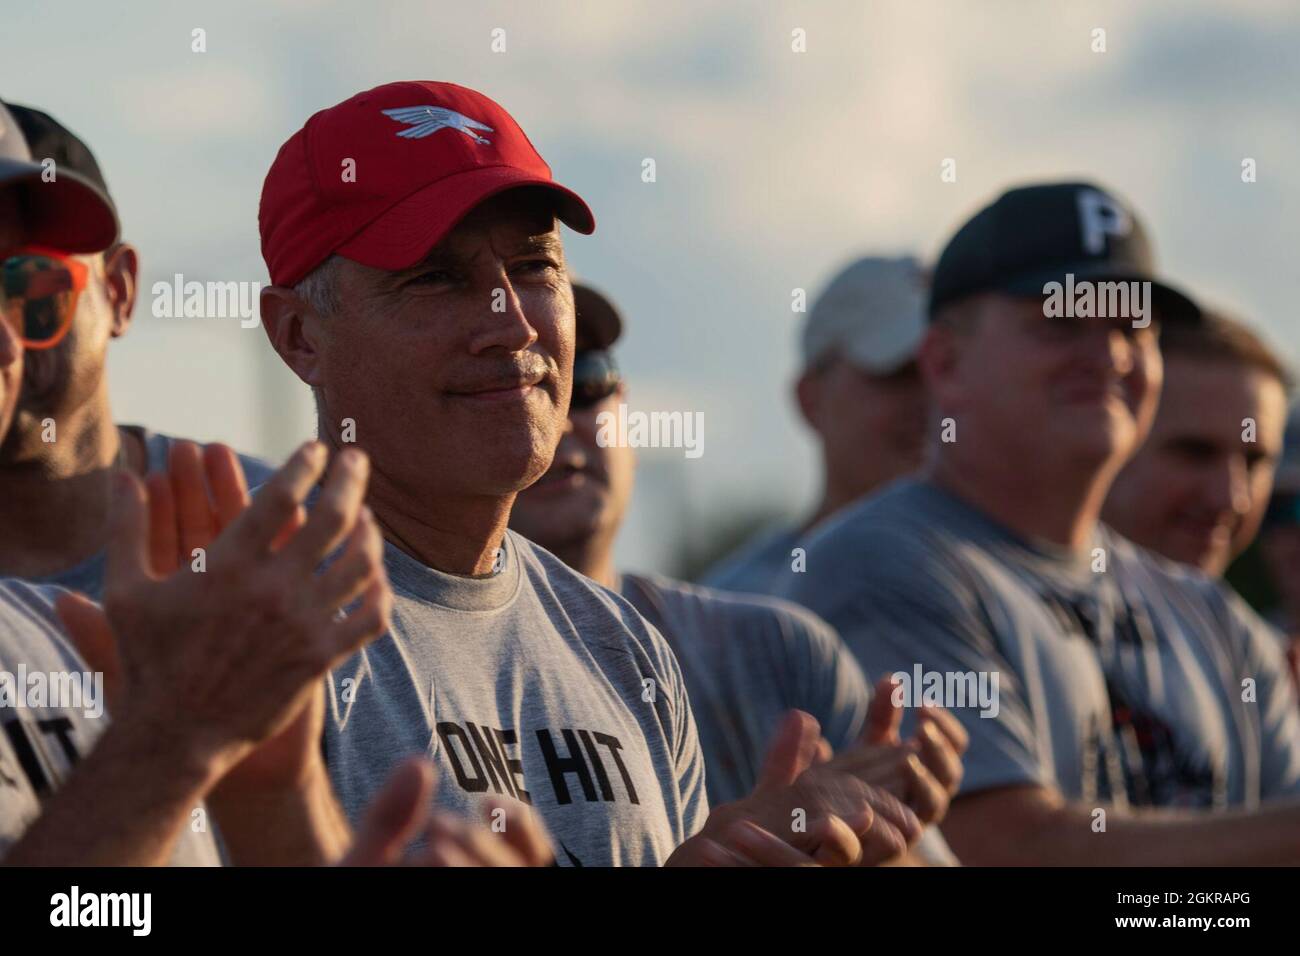 U.S. Air Force Brig. Gen. Jeremy Sloane, 36th Wing commander, claps for the opposing team during the Chief’s versus Eagle’s softball game at Andersen Air Force Base, Guam, June 18, 2021. Sloane led the Eagle’s to victory with a 18 to 14 win against the Chief’s. Stock Photo